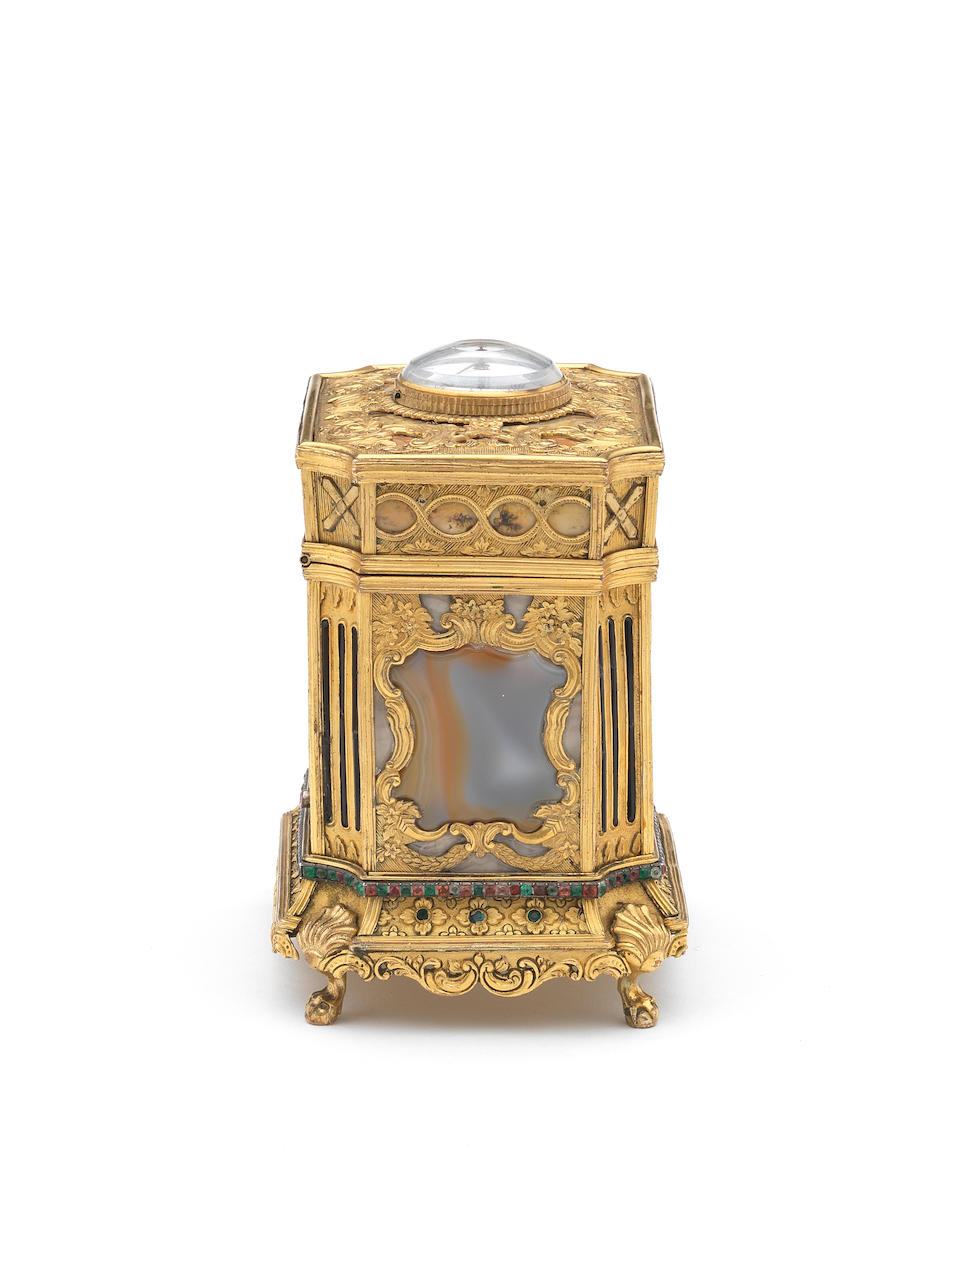 A fine and rare late 18th century moss agate and stone set gilt metal musical casket with automata scene in the manner of James Cox The watch movement by J. Stroud, London